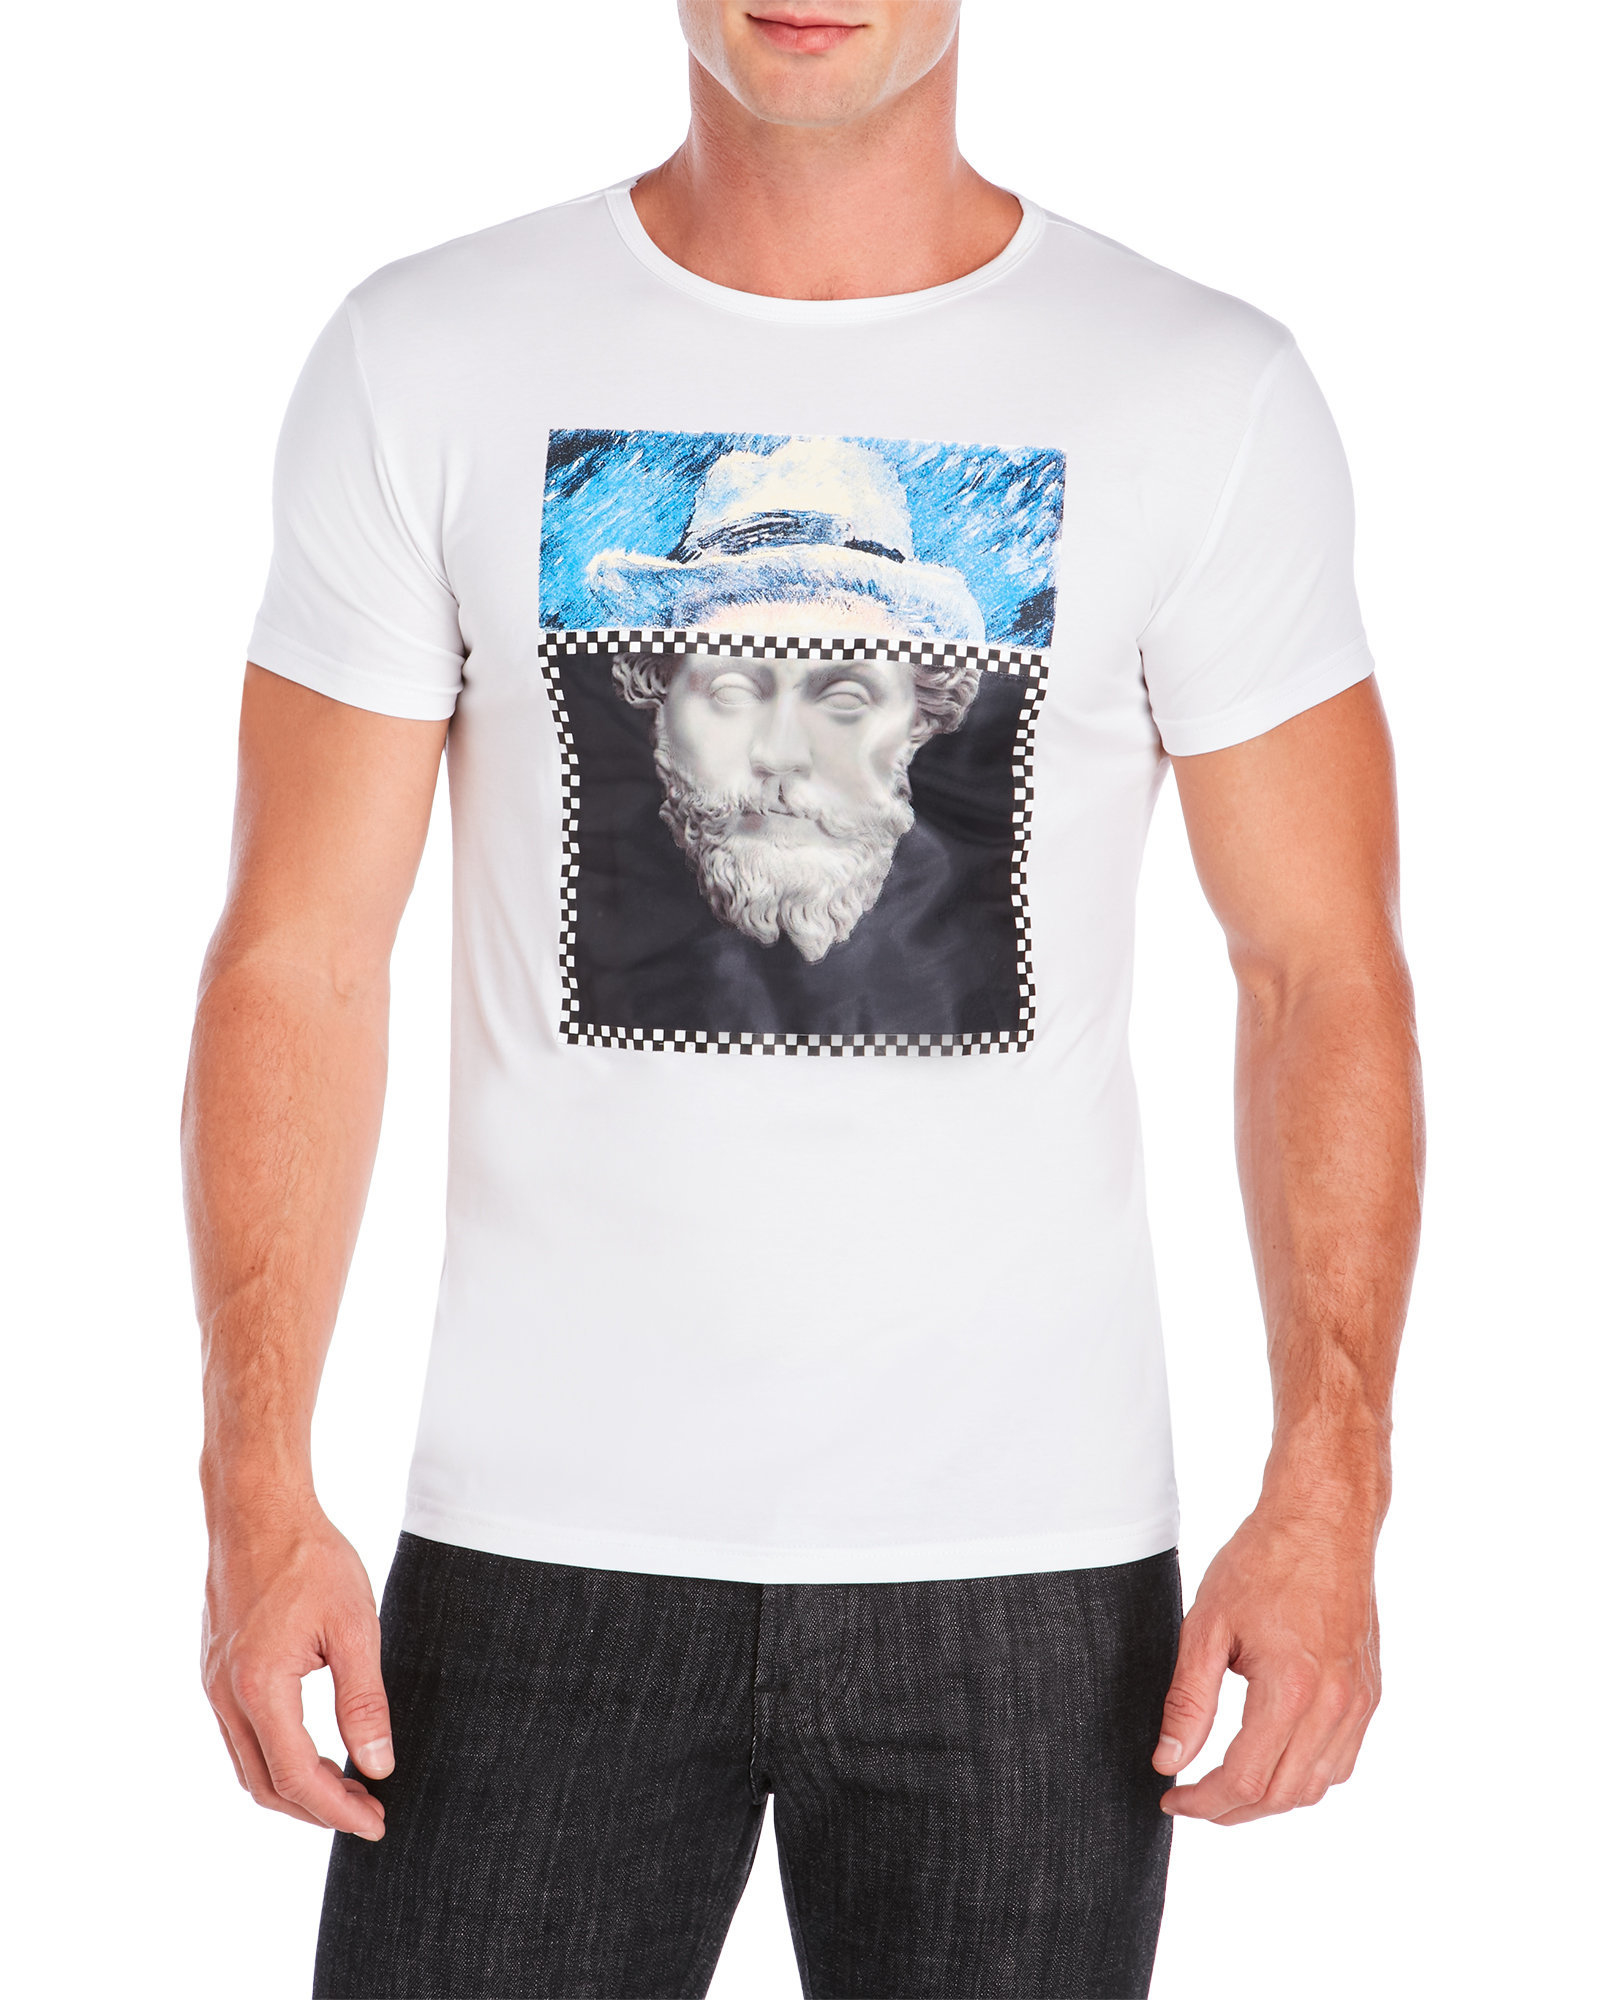 Lyst - Xray Jeans 3D Statue Graphic Tee in White for Men